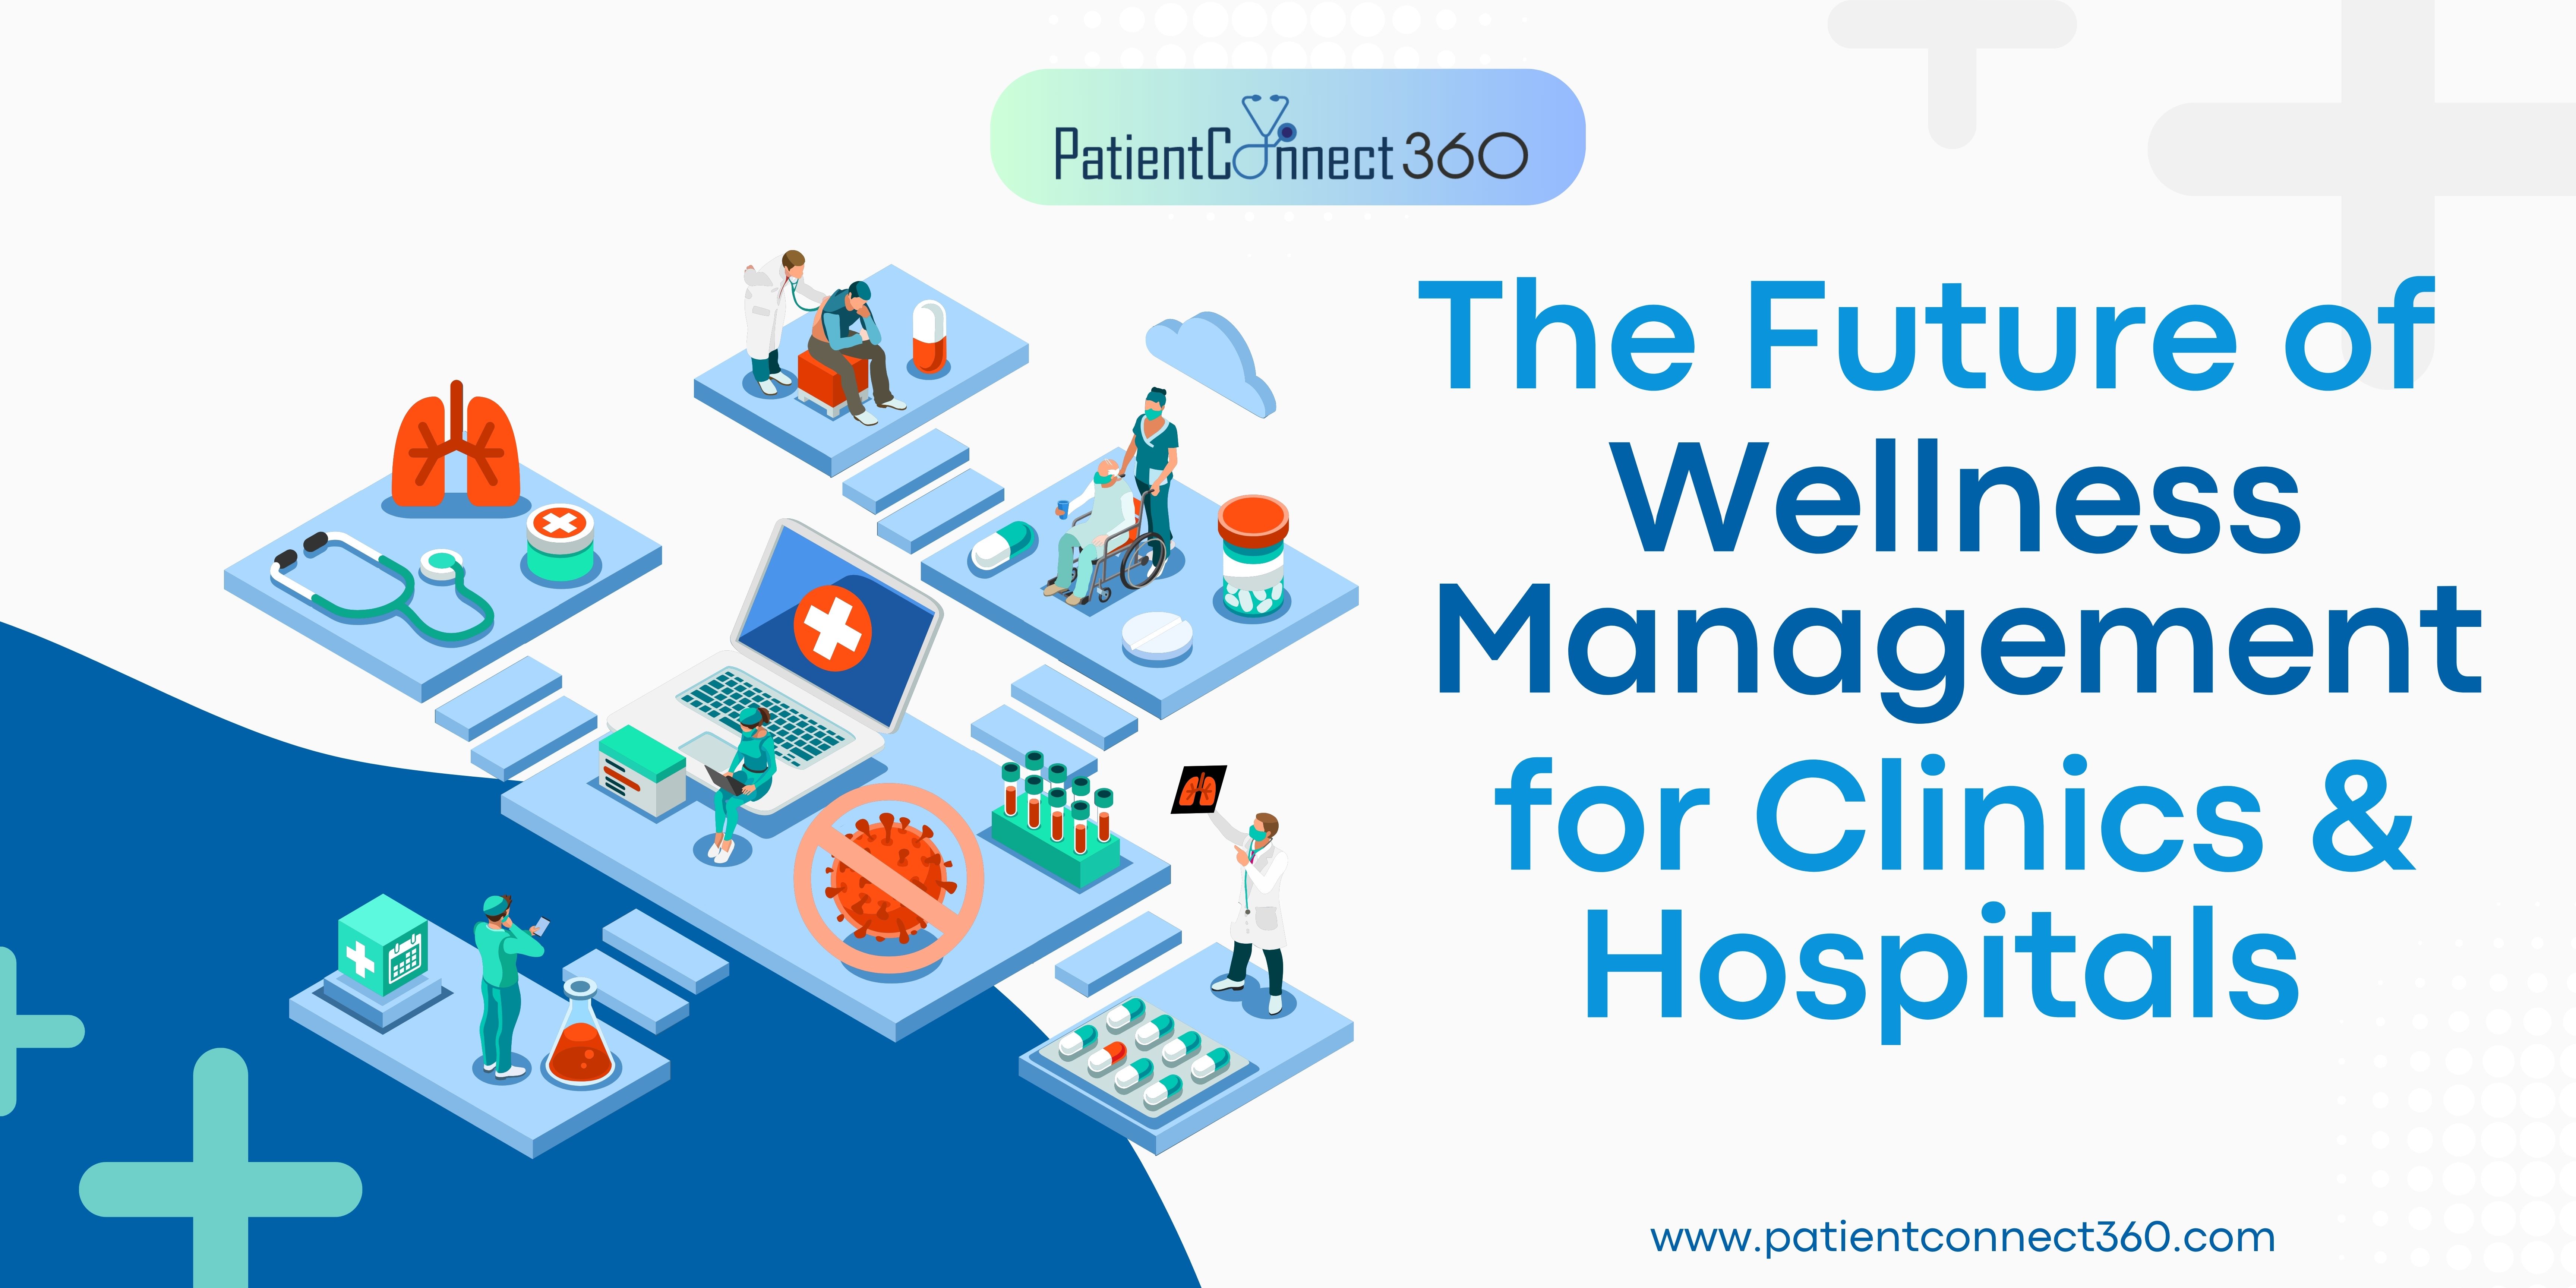 DatientCo Anect 360

The Future of
Wellness

for Clinics &amp;
Hospitals

www.patientconnect360.com